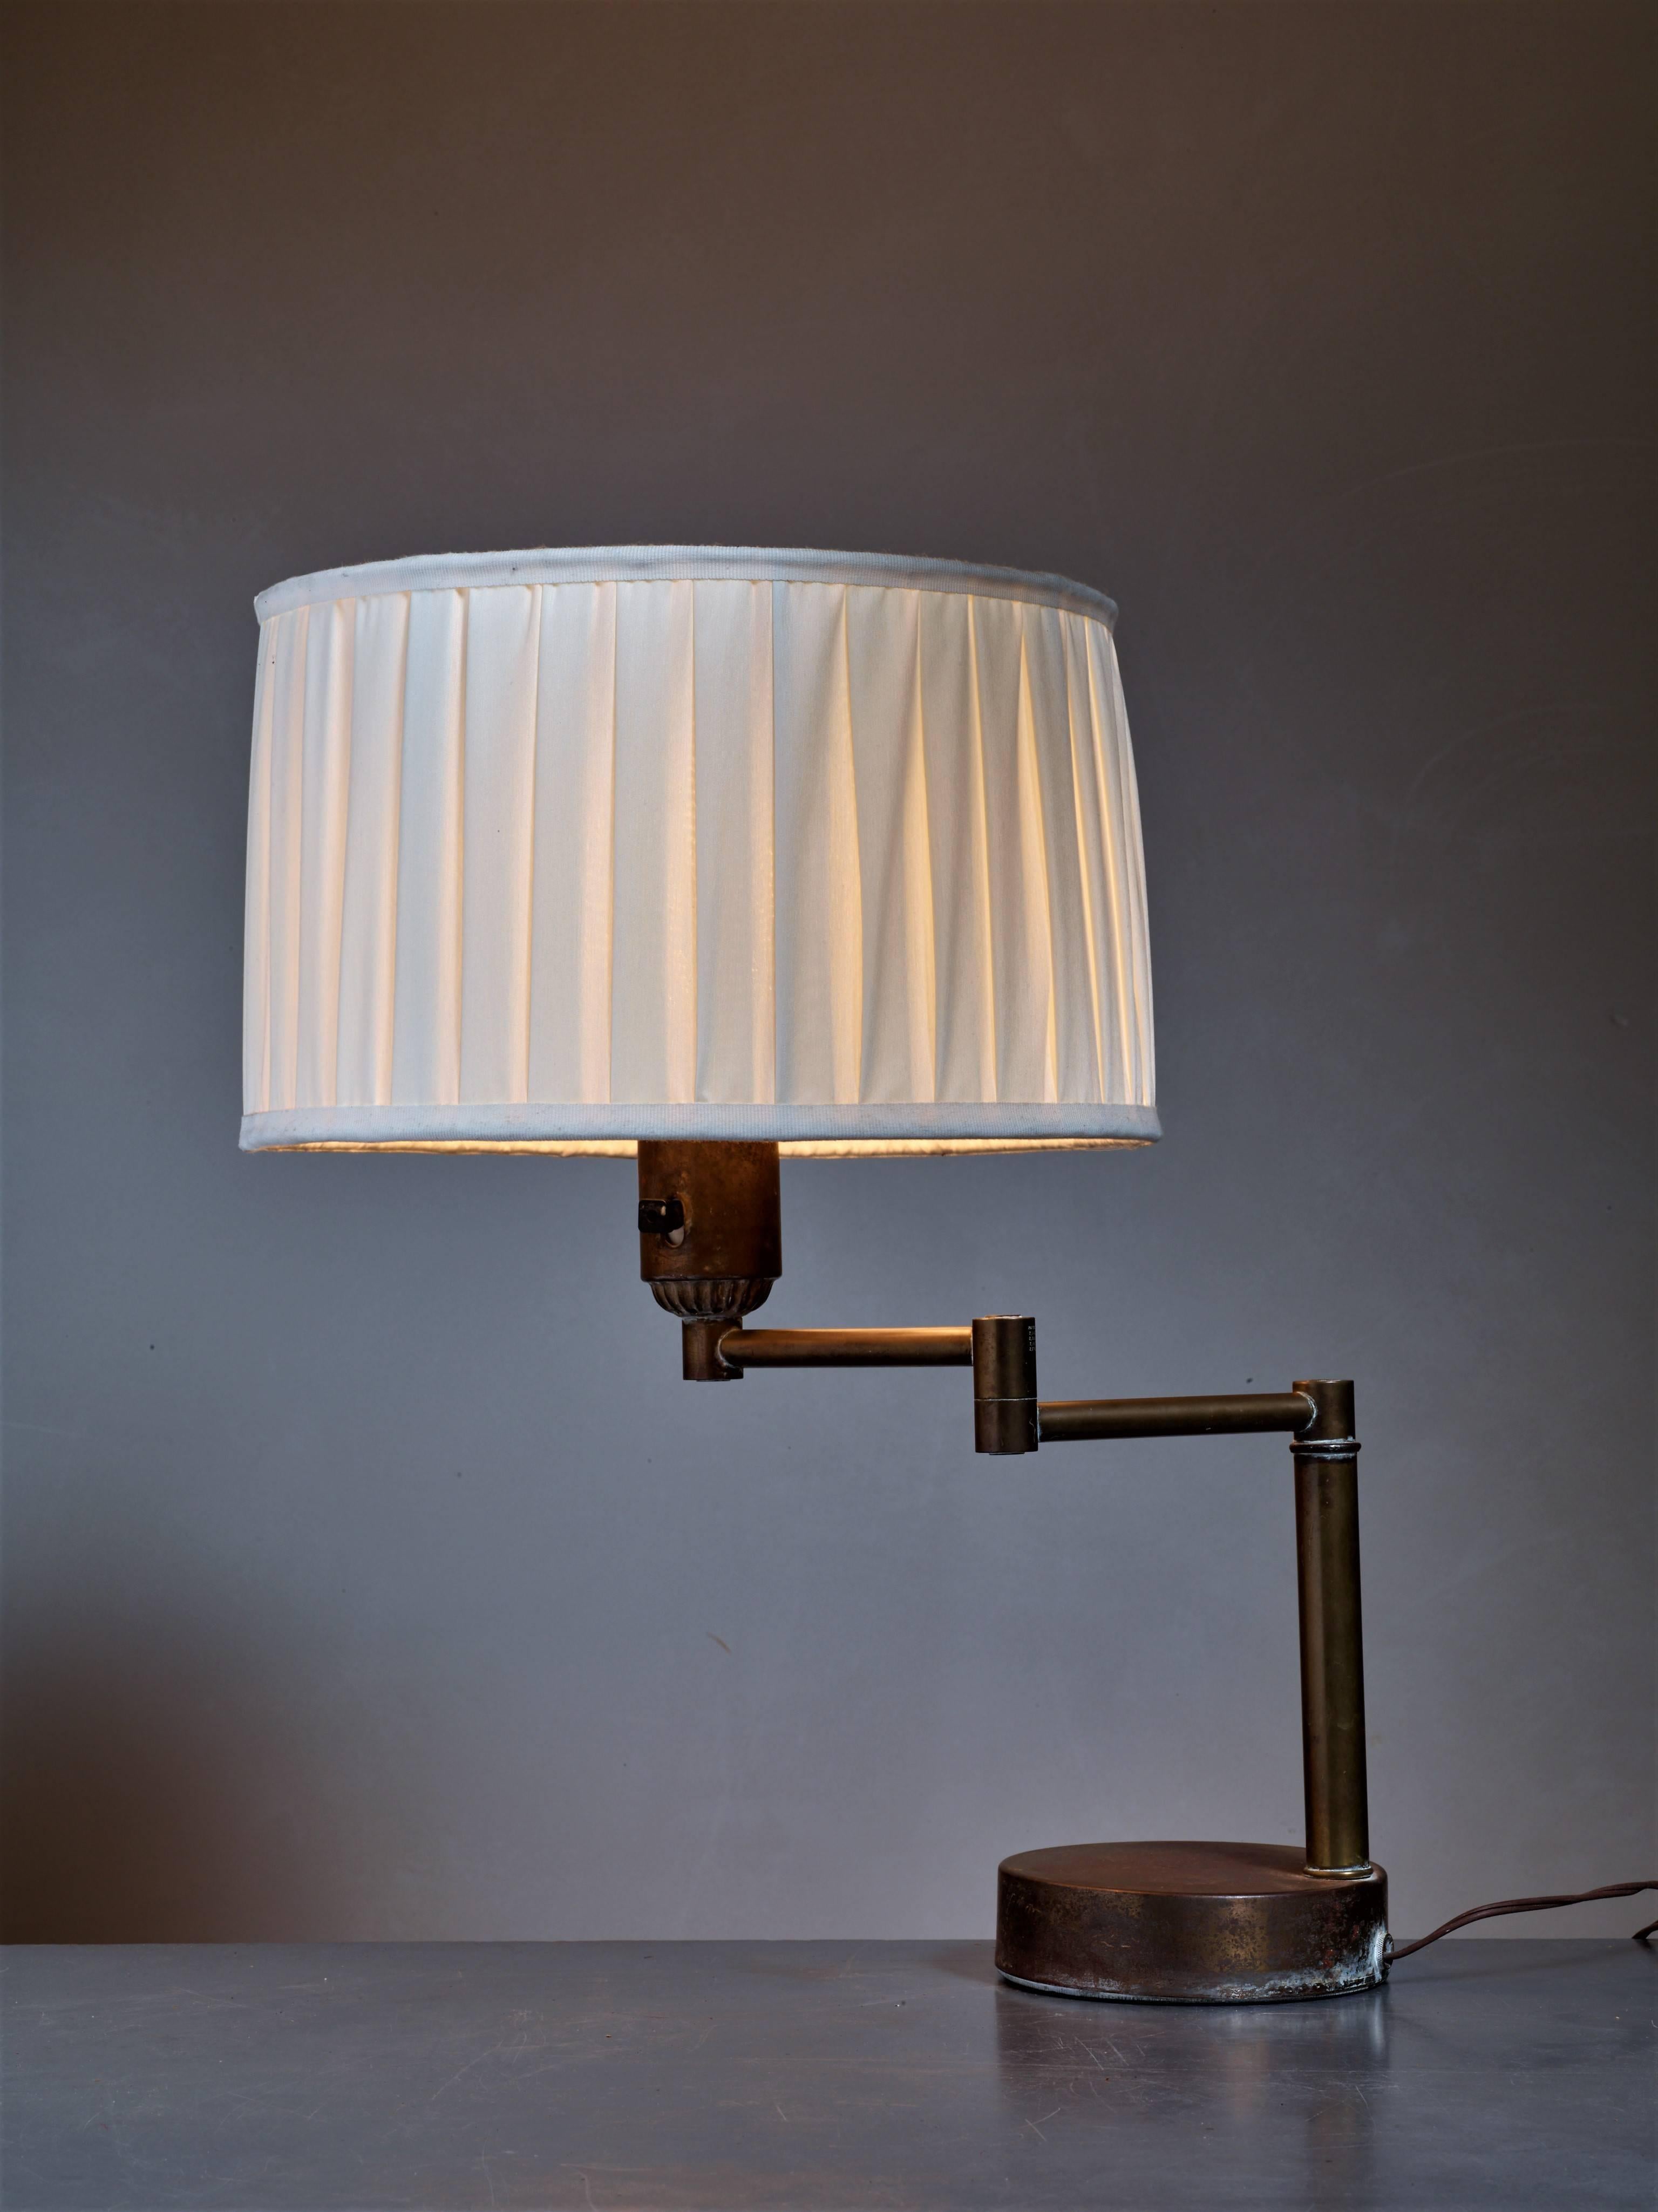 A Walter Von Nessen swing-arm table lamp with a milk glass diffuser and the original fabric shade. The lamp is a variation on his Classic stainless steel design from 1927. This base is made of brass with a beautiful patina.
The swing arm allows you